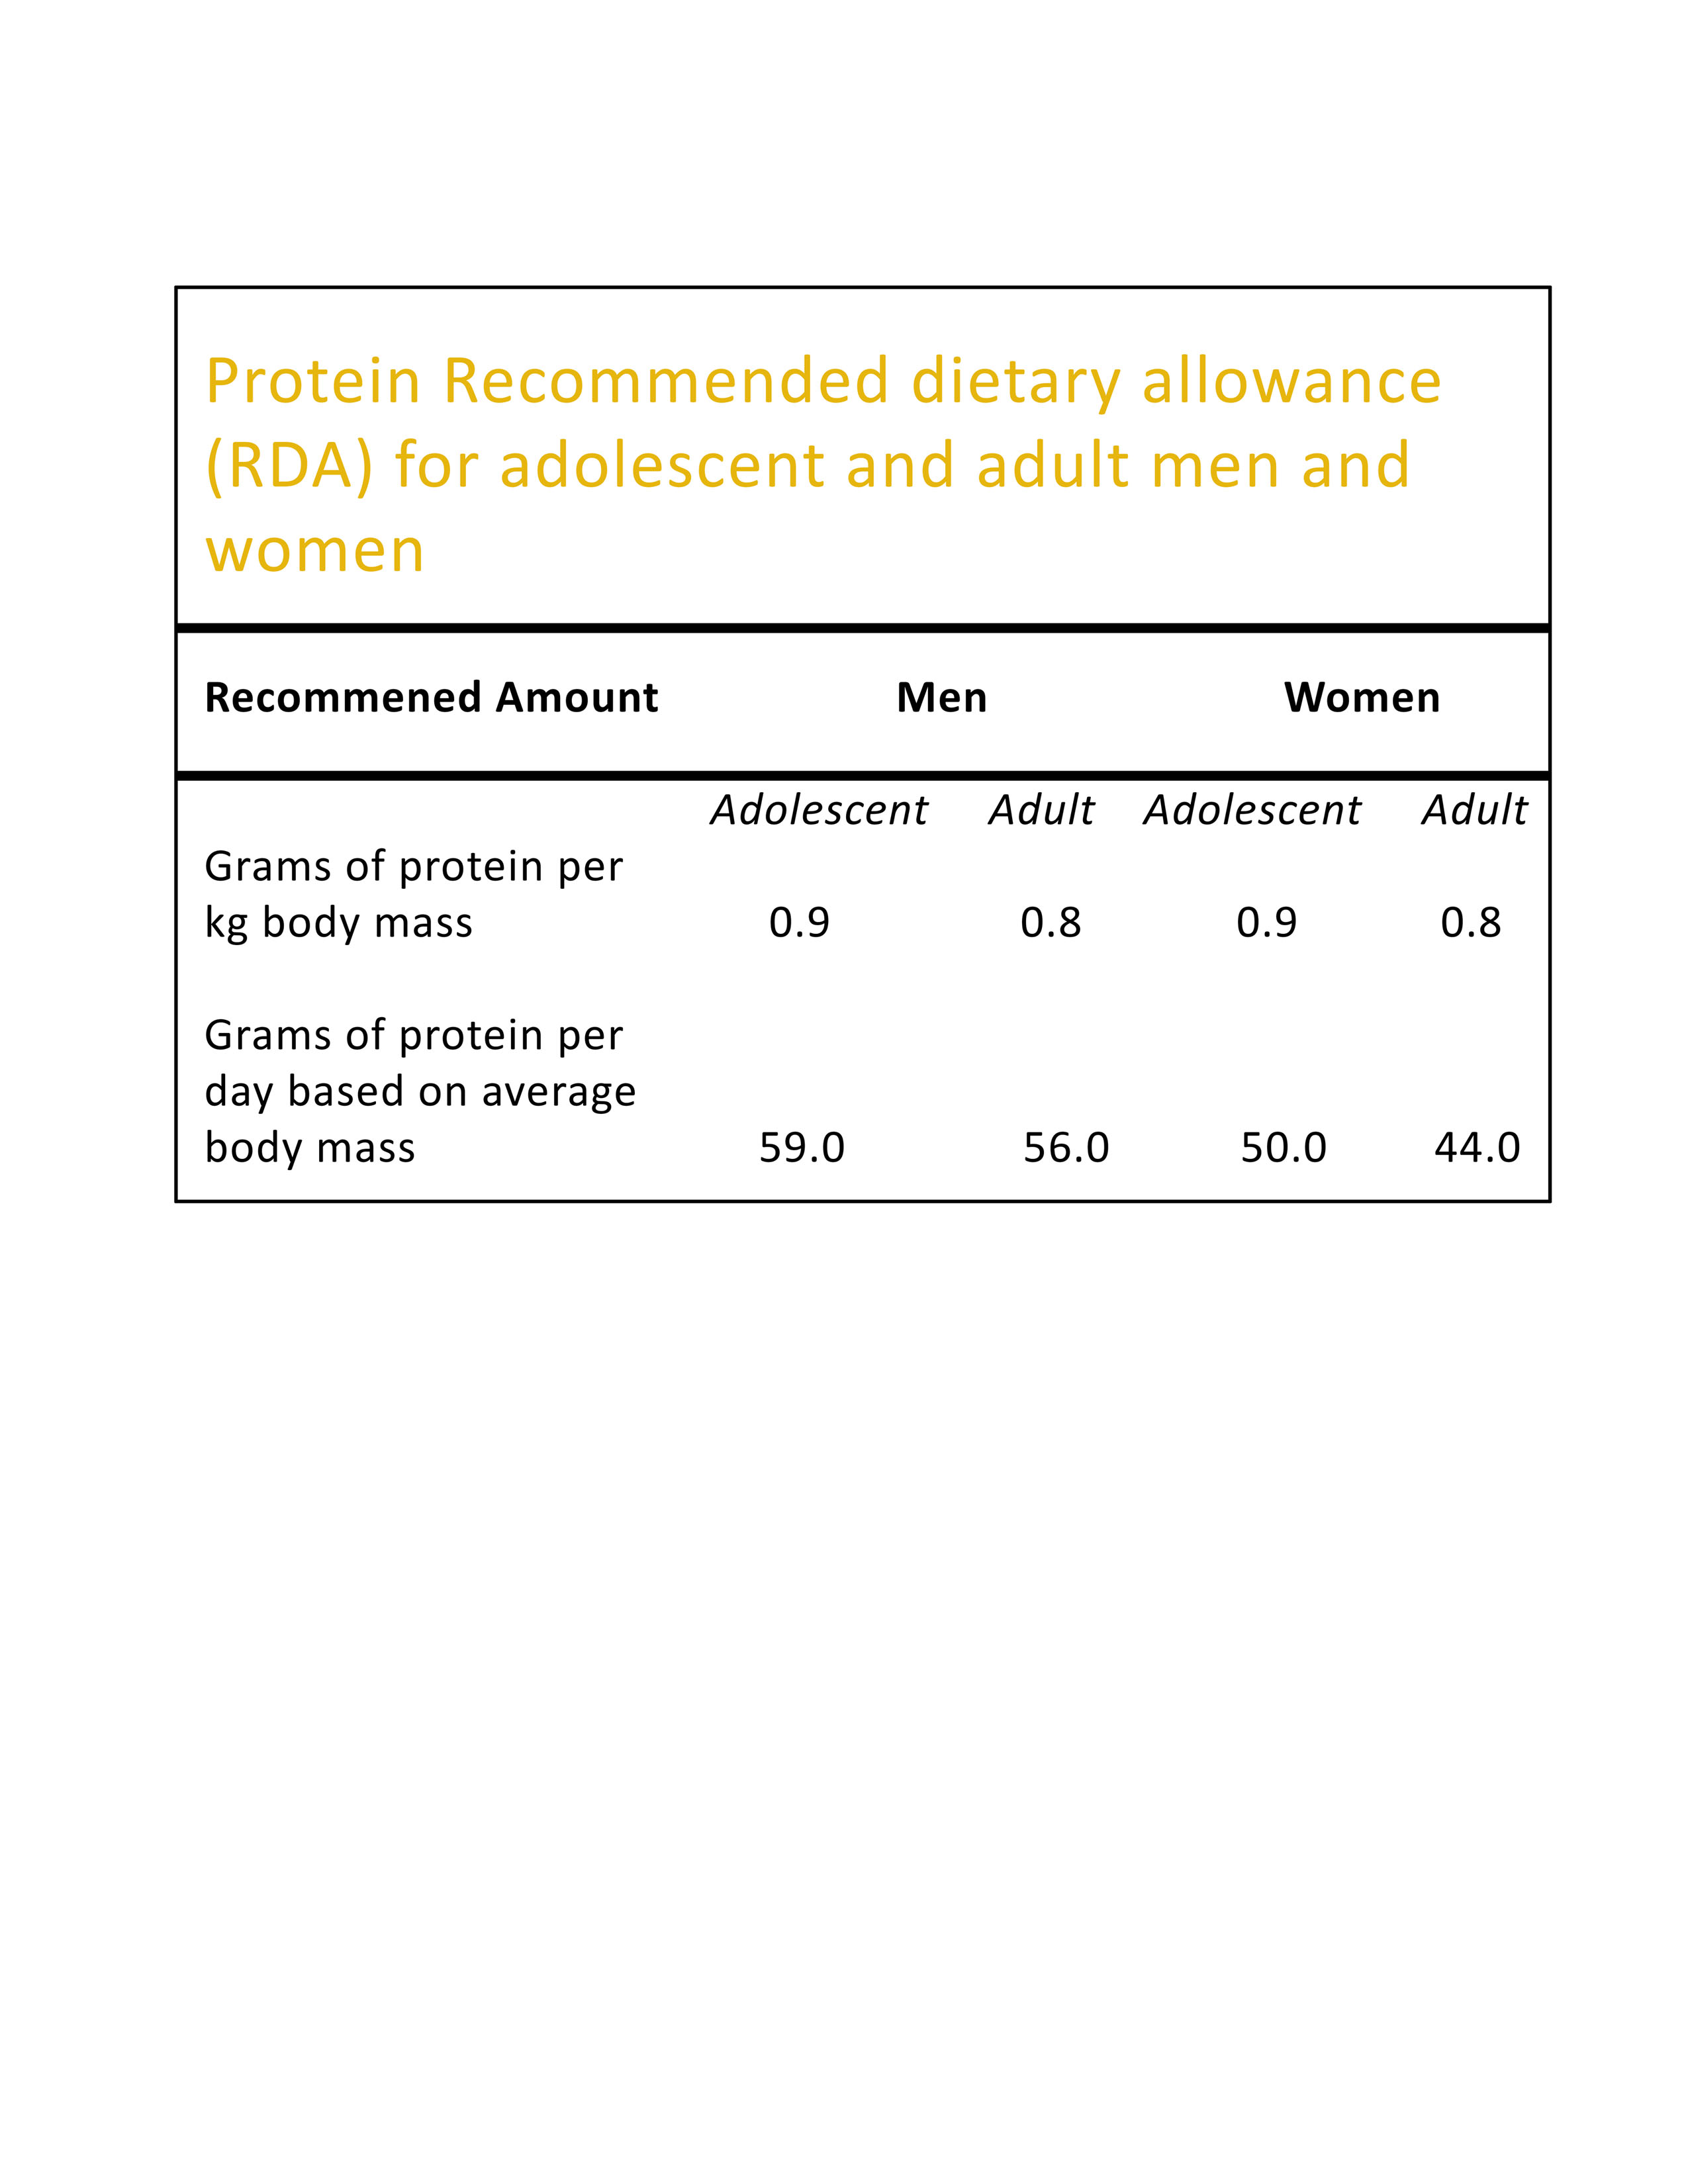 Protein recommended dietary allowance chart.